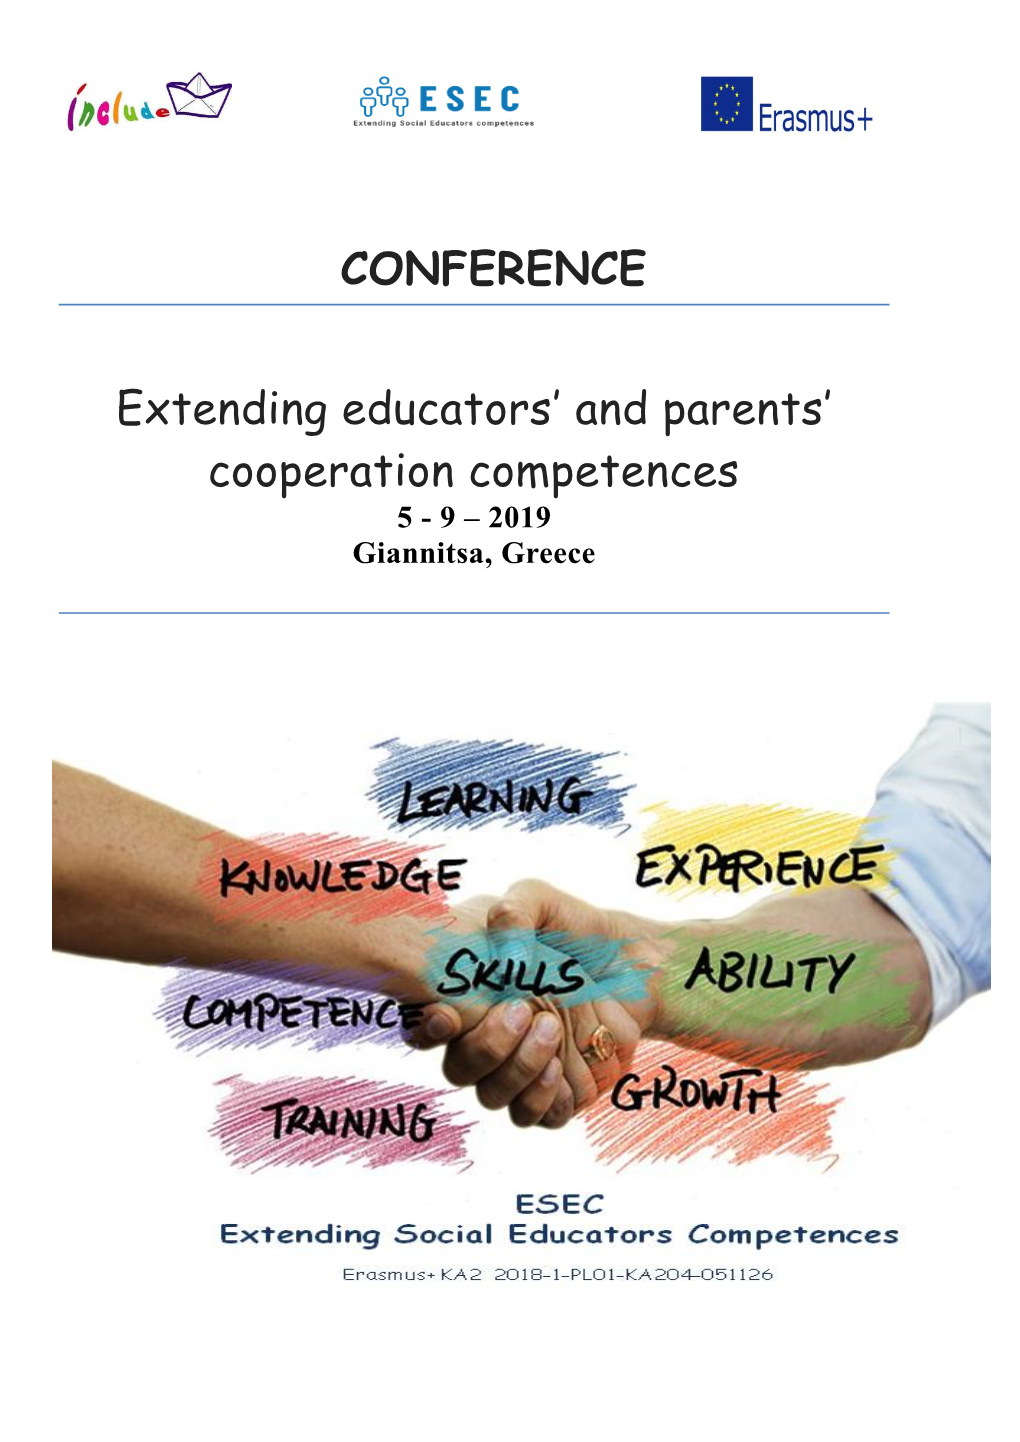 CONFERENCE Extending Educators' and Parents' Cooperation